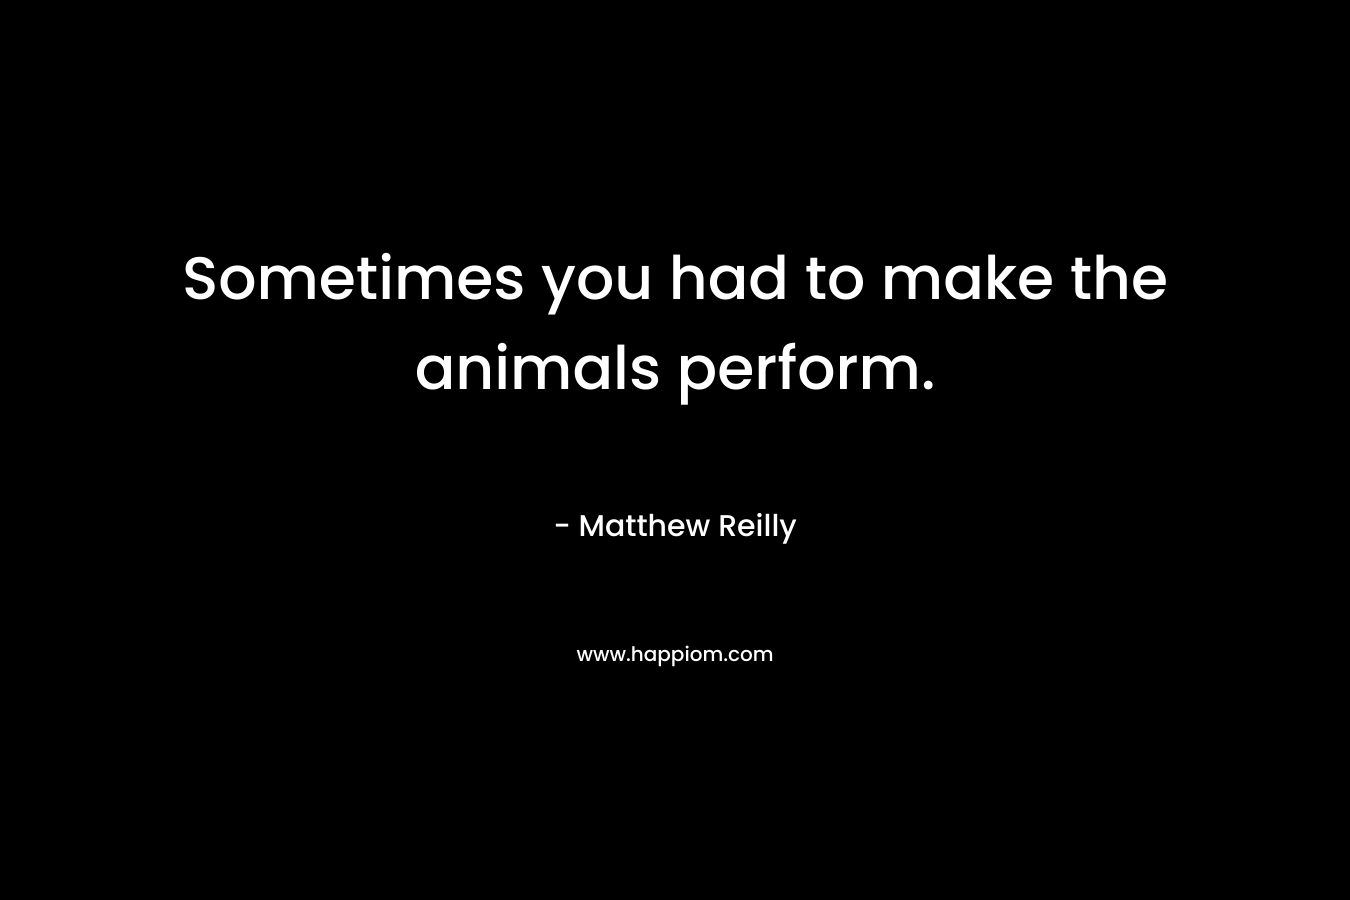 Sometimes you had to make the animals perform.